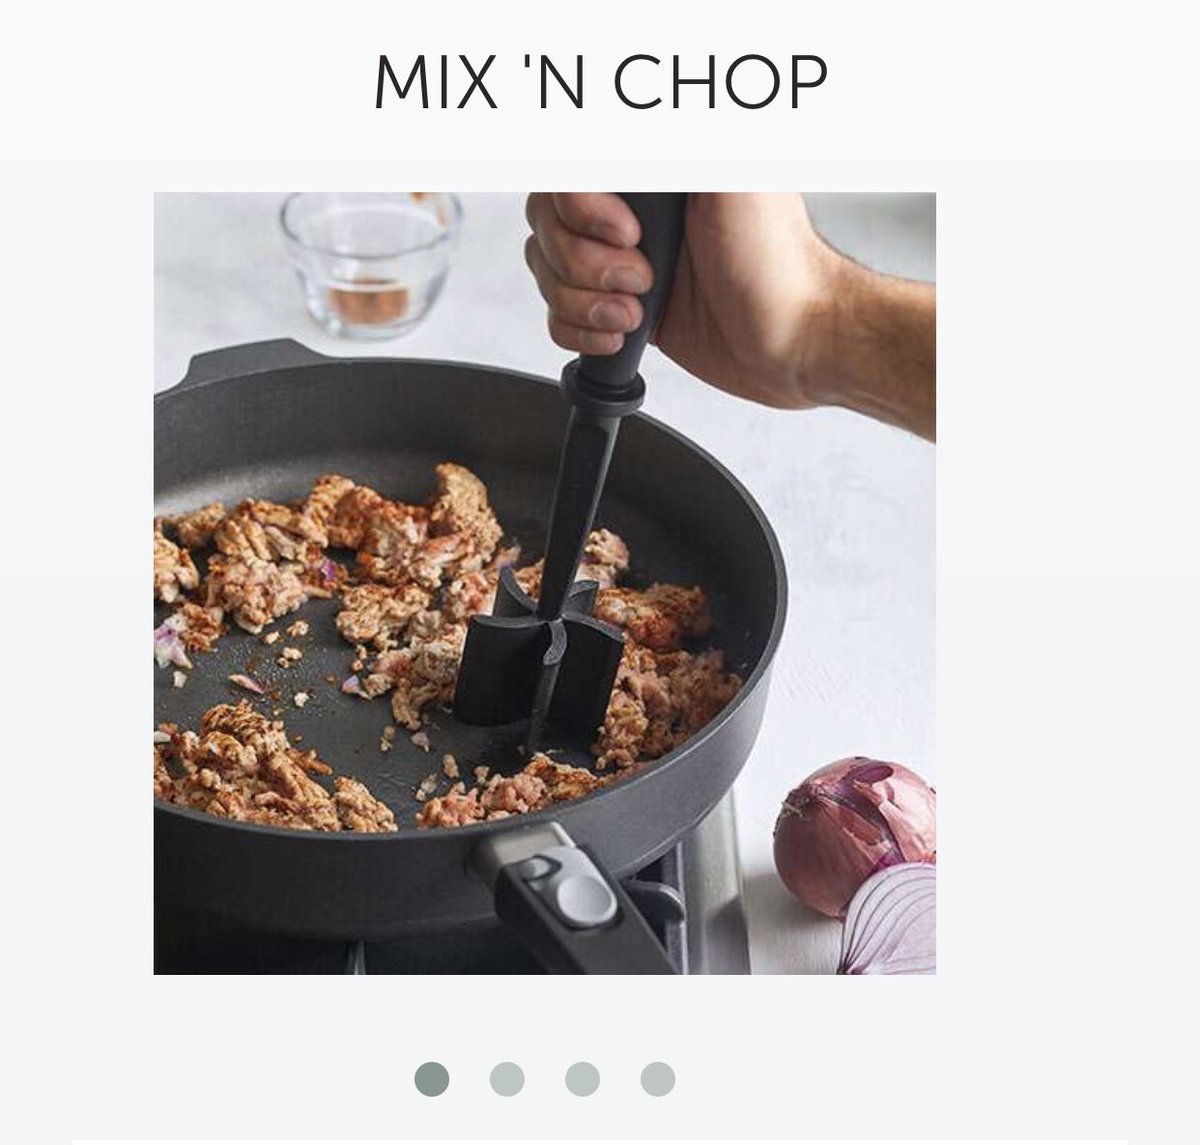 Bres Pampered Chef on X: I own a Mix 'N Chop and can tell you it works  great! Even my Dad was skeptical of this at first and once he tried it